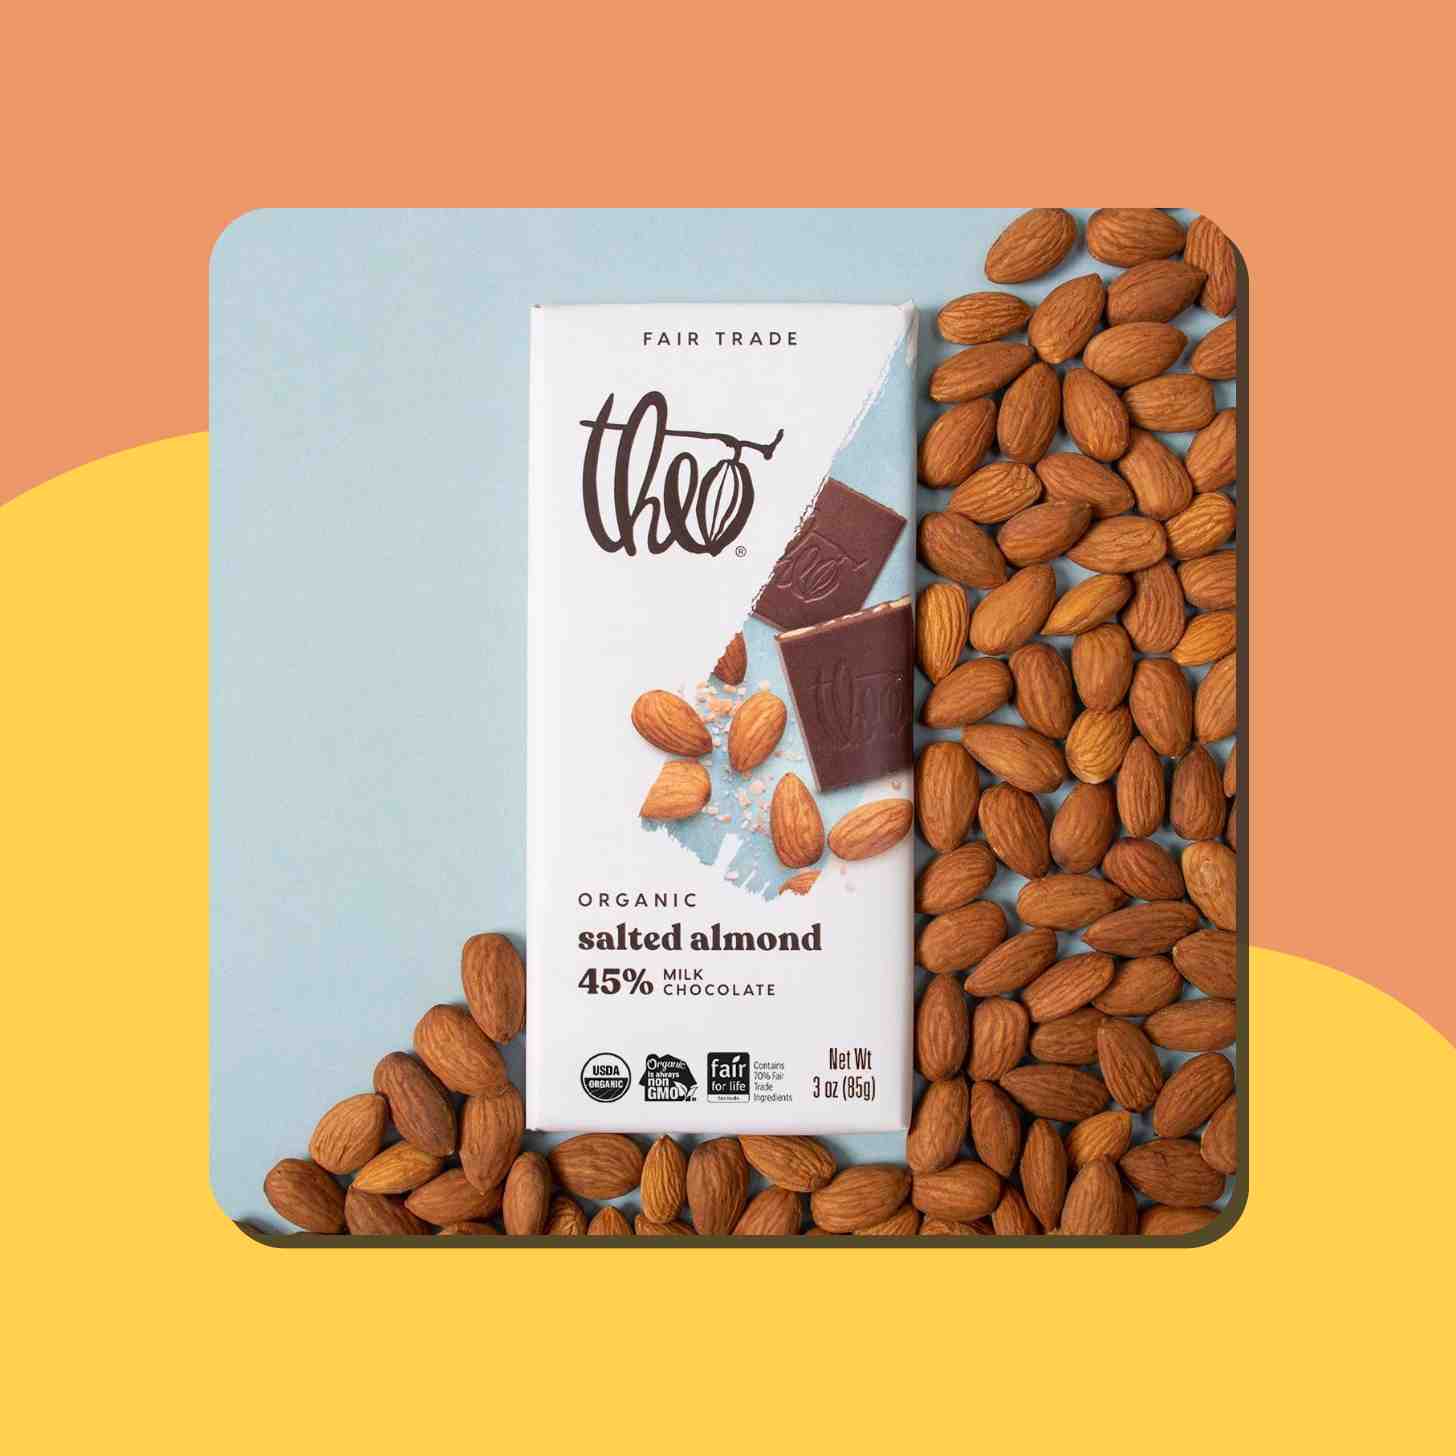 A Box Of Theo Organic Salted Almond Chocolate Sorrounded By Almonds